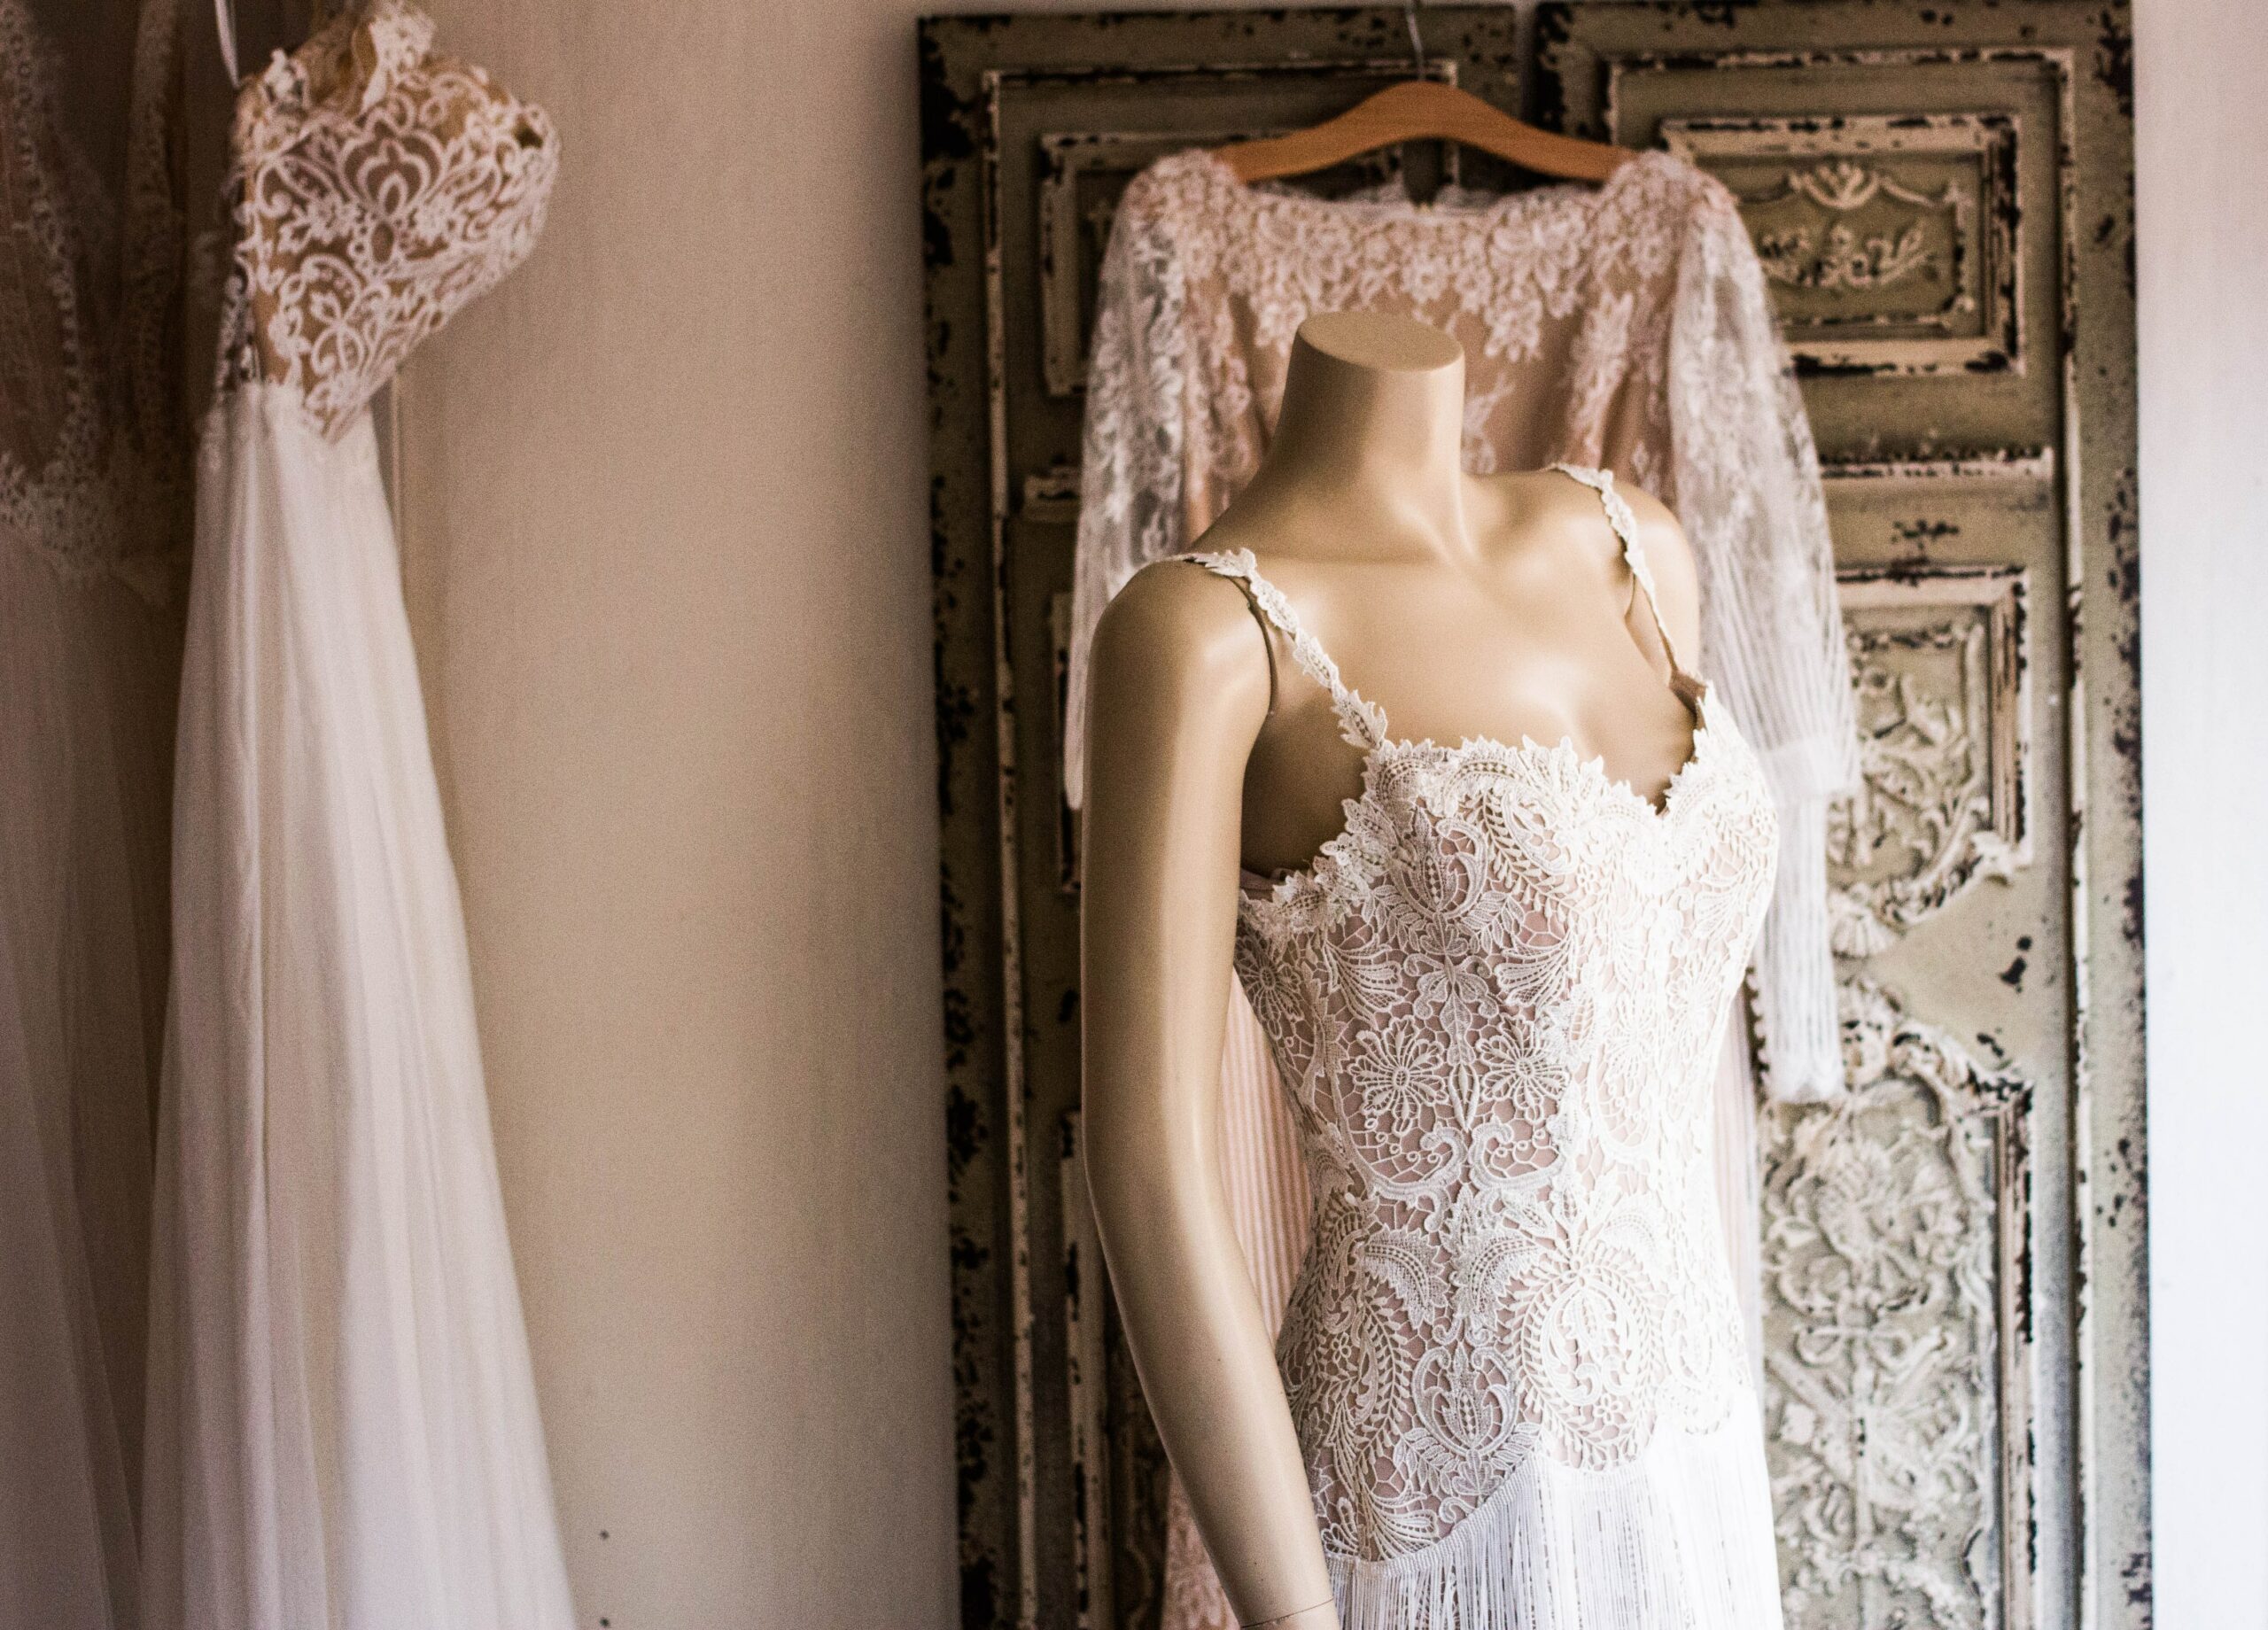 How Much Does it Cost to Dry Clean a Wedding Dress